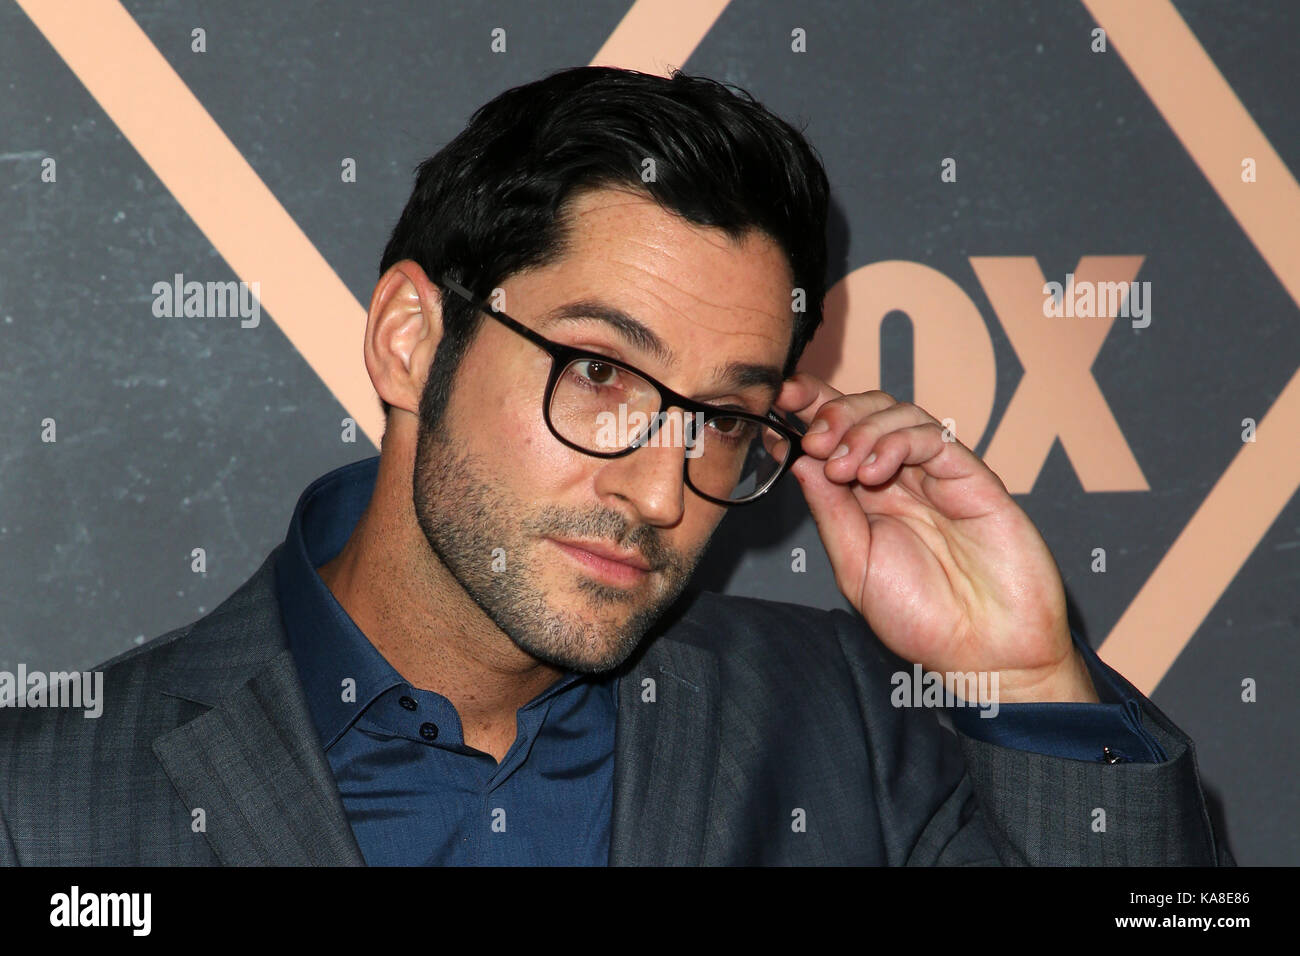 WEST HOLLYWOOD, CA - SEPTEMBER 25: Tom Ellis, at FOX Fall Party at Catch LA on September 25, 2017 in Los Angeles, California. Credit: Faye Sadou/MediaPunch Stock Photo